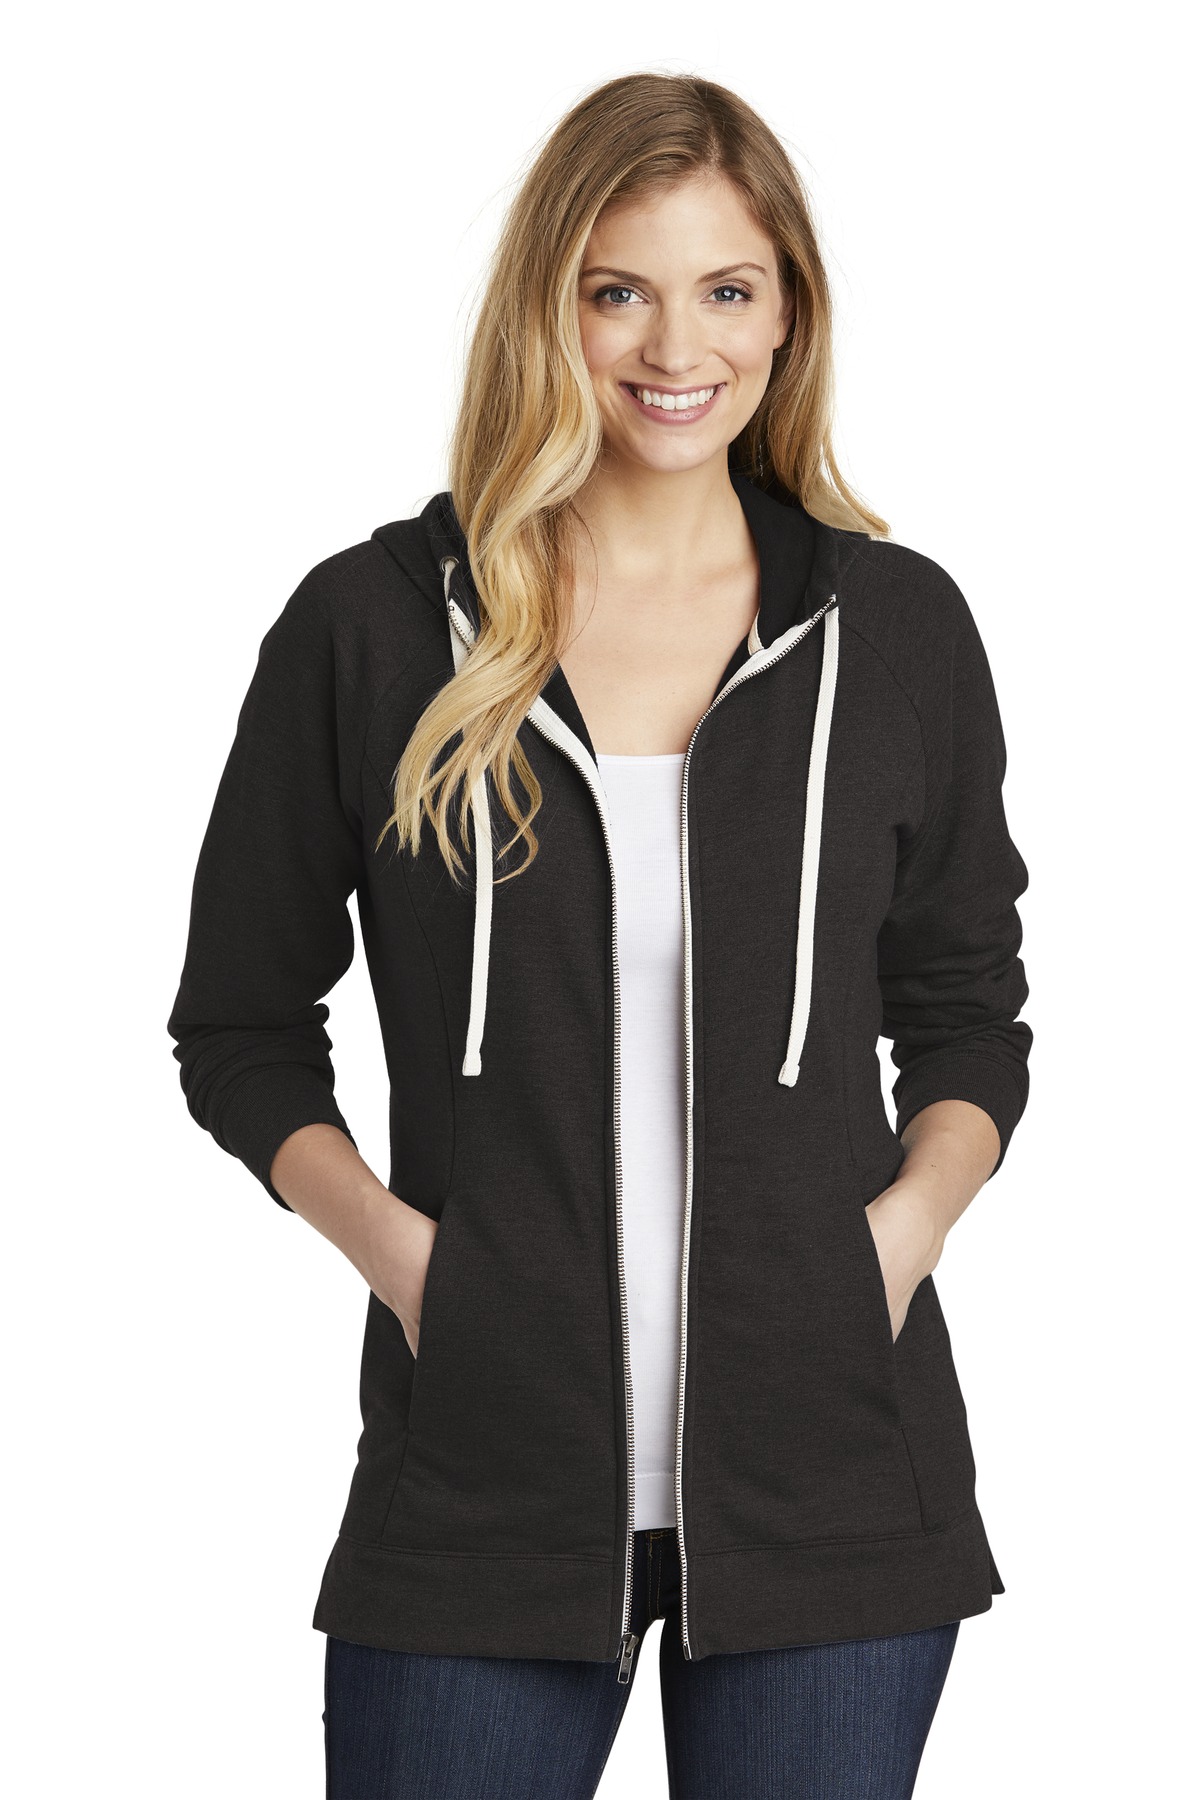 District Ladies Sweatshirts & Fleece for Hospitality ® Womens Perfect Tri ® French Terry Full-Zip Hoodie.-District